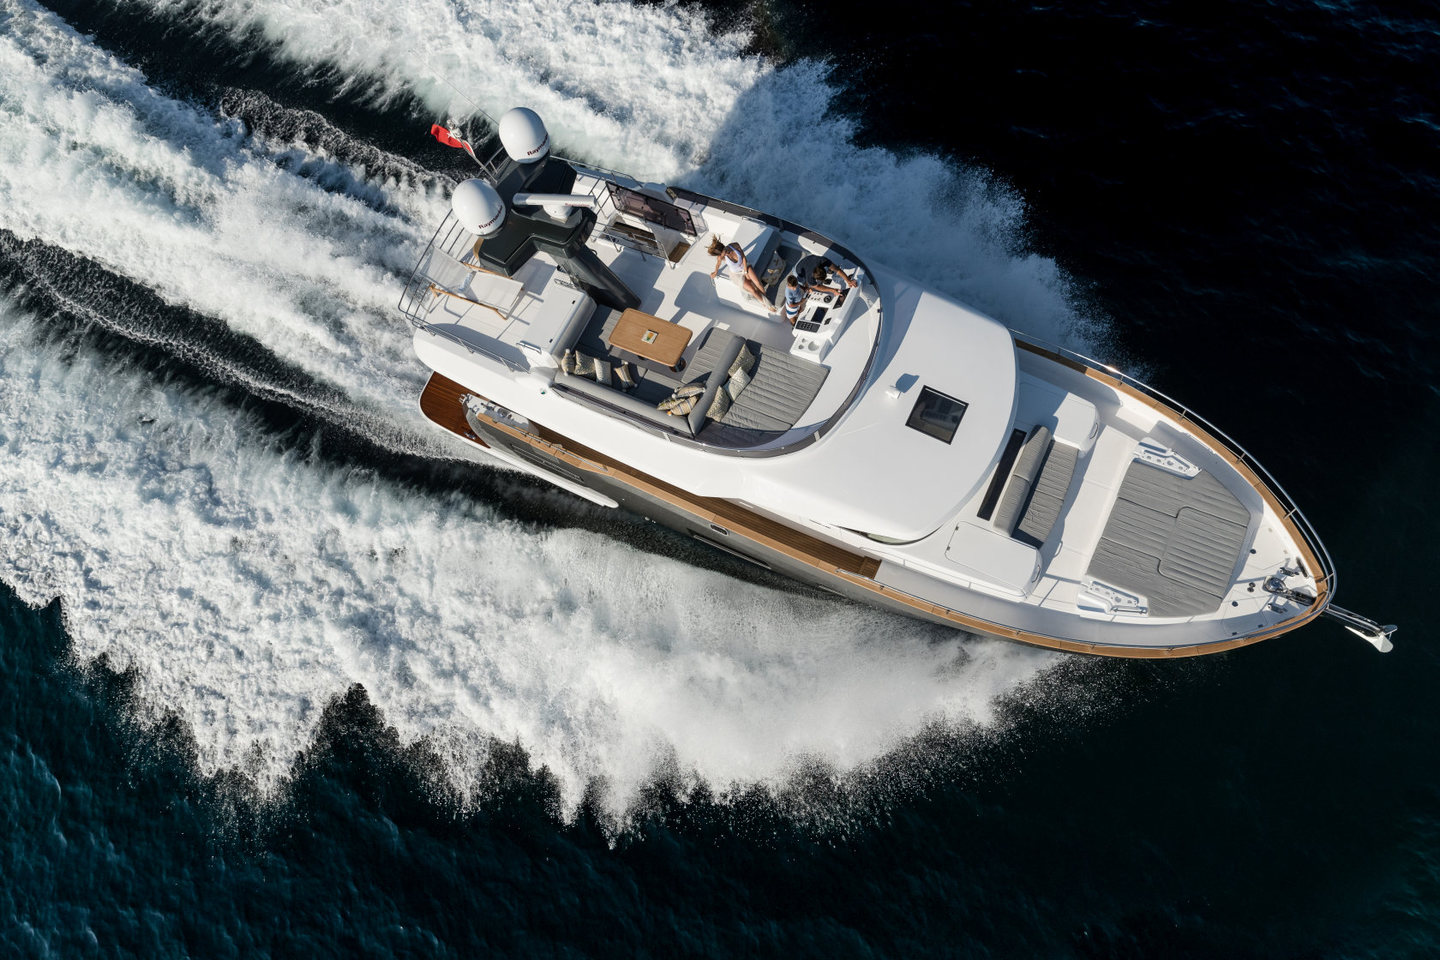 360 VR Virtual Tours of the Sirena 58